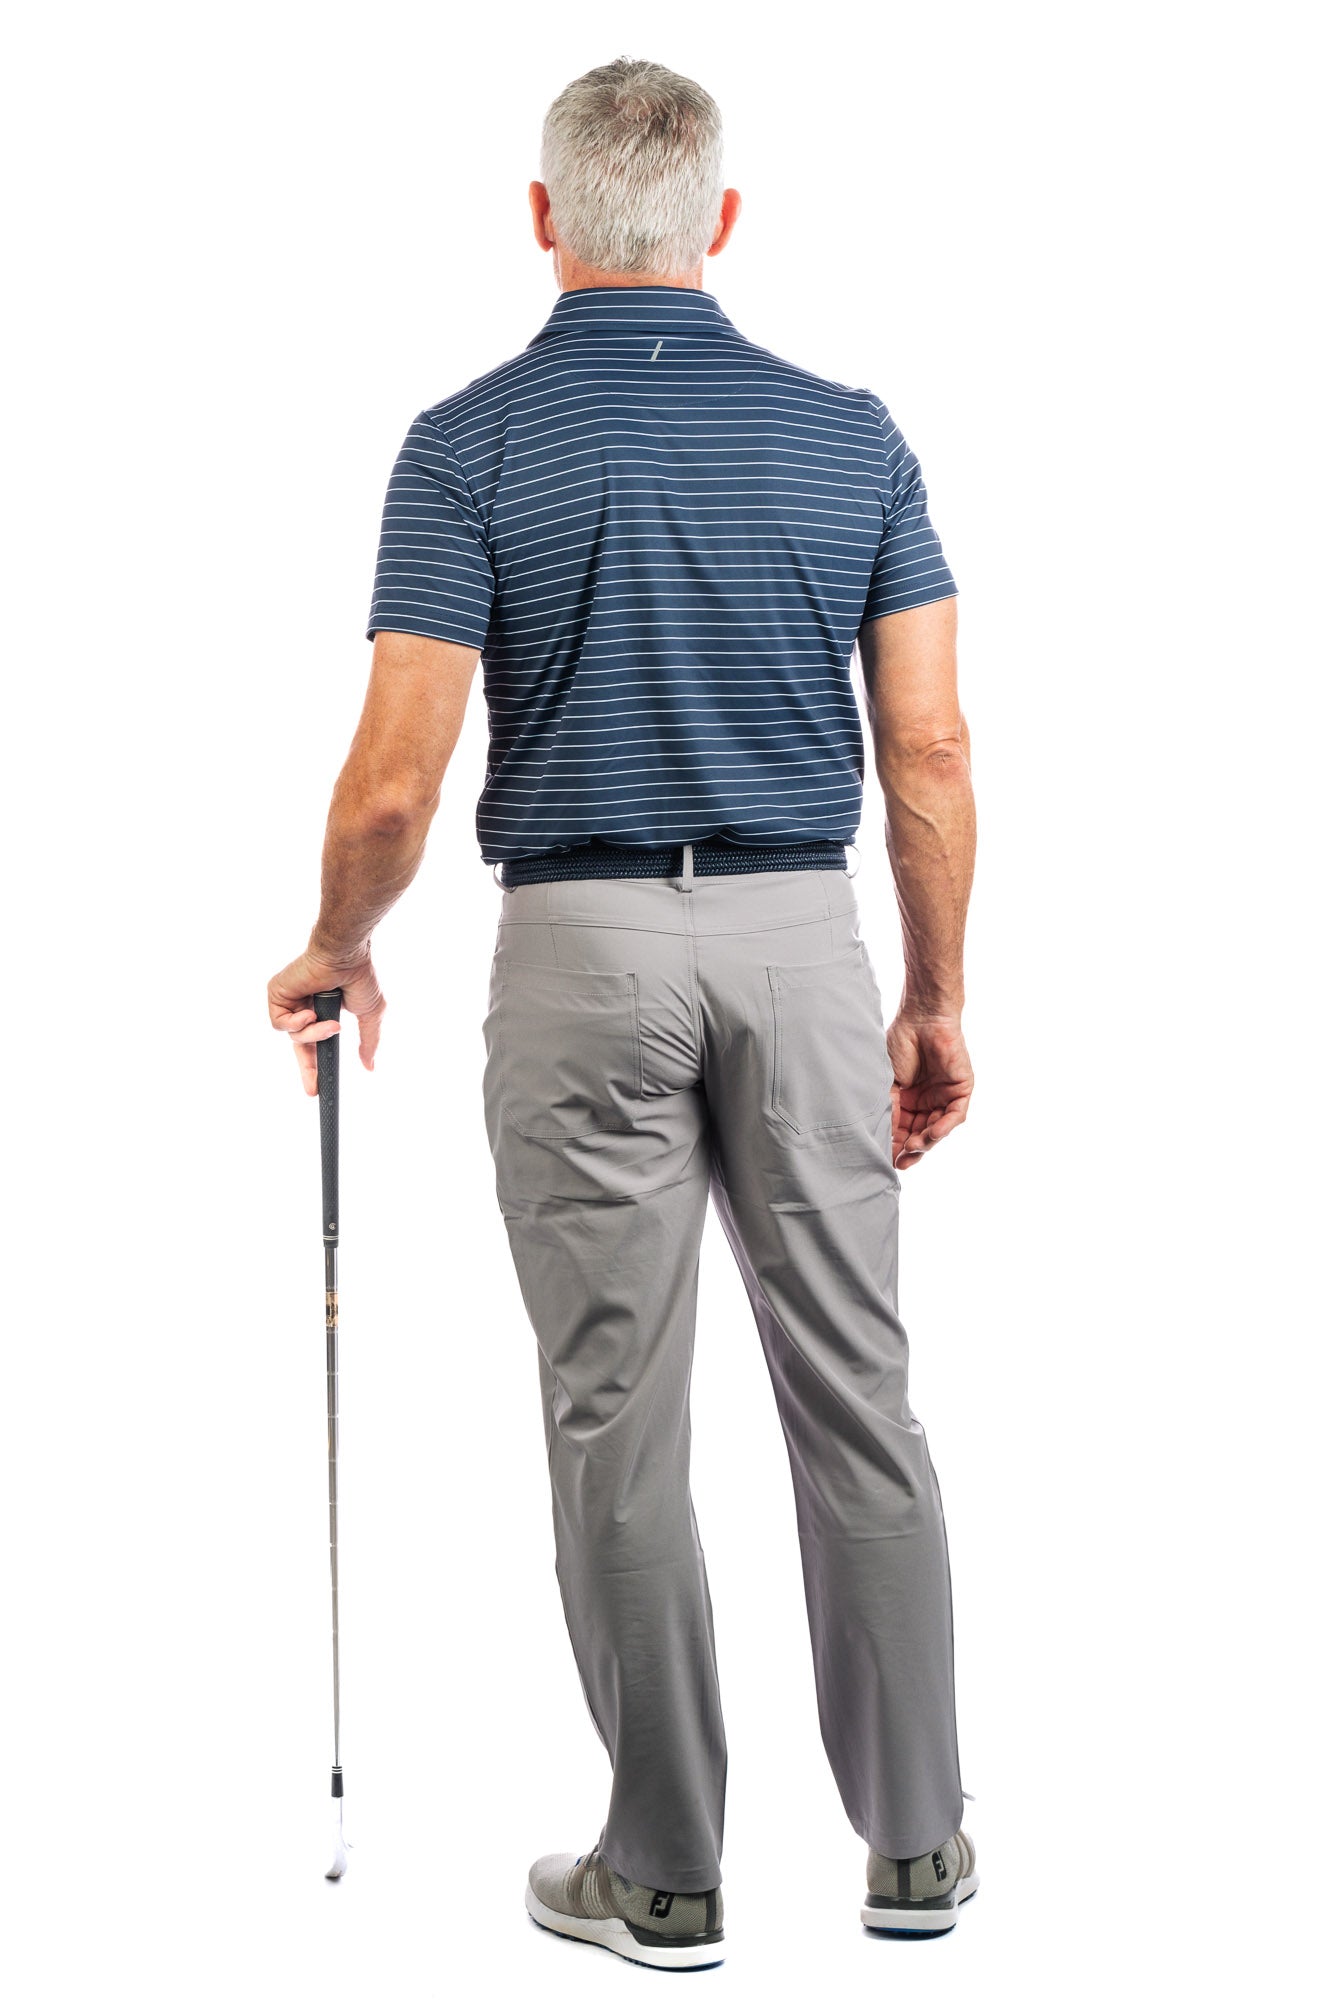 Back view of a model posing in a navy striped golf polo and grey pants, holding a golf club.